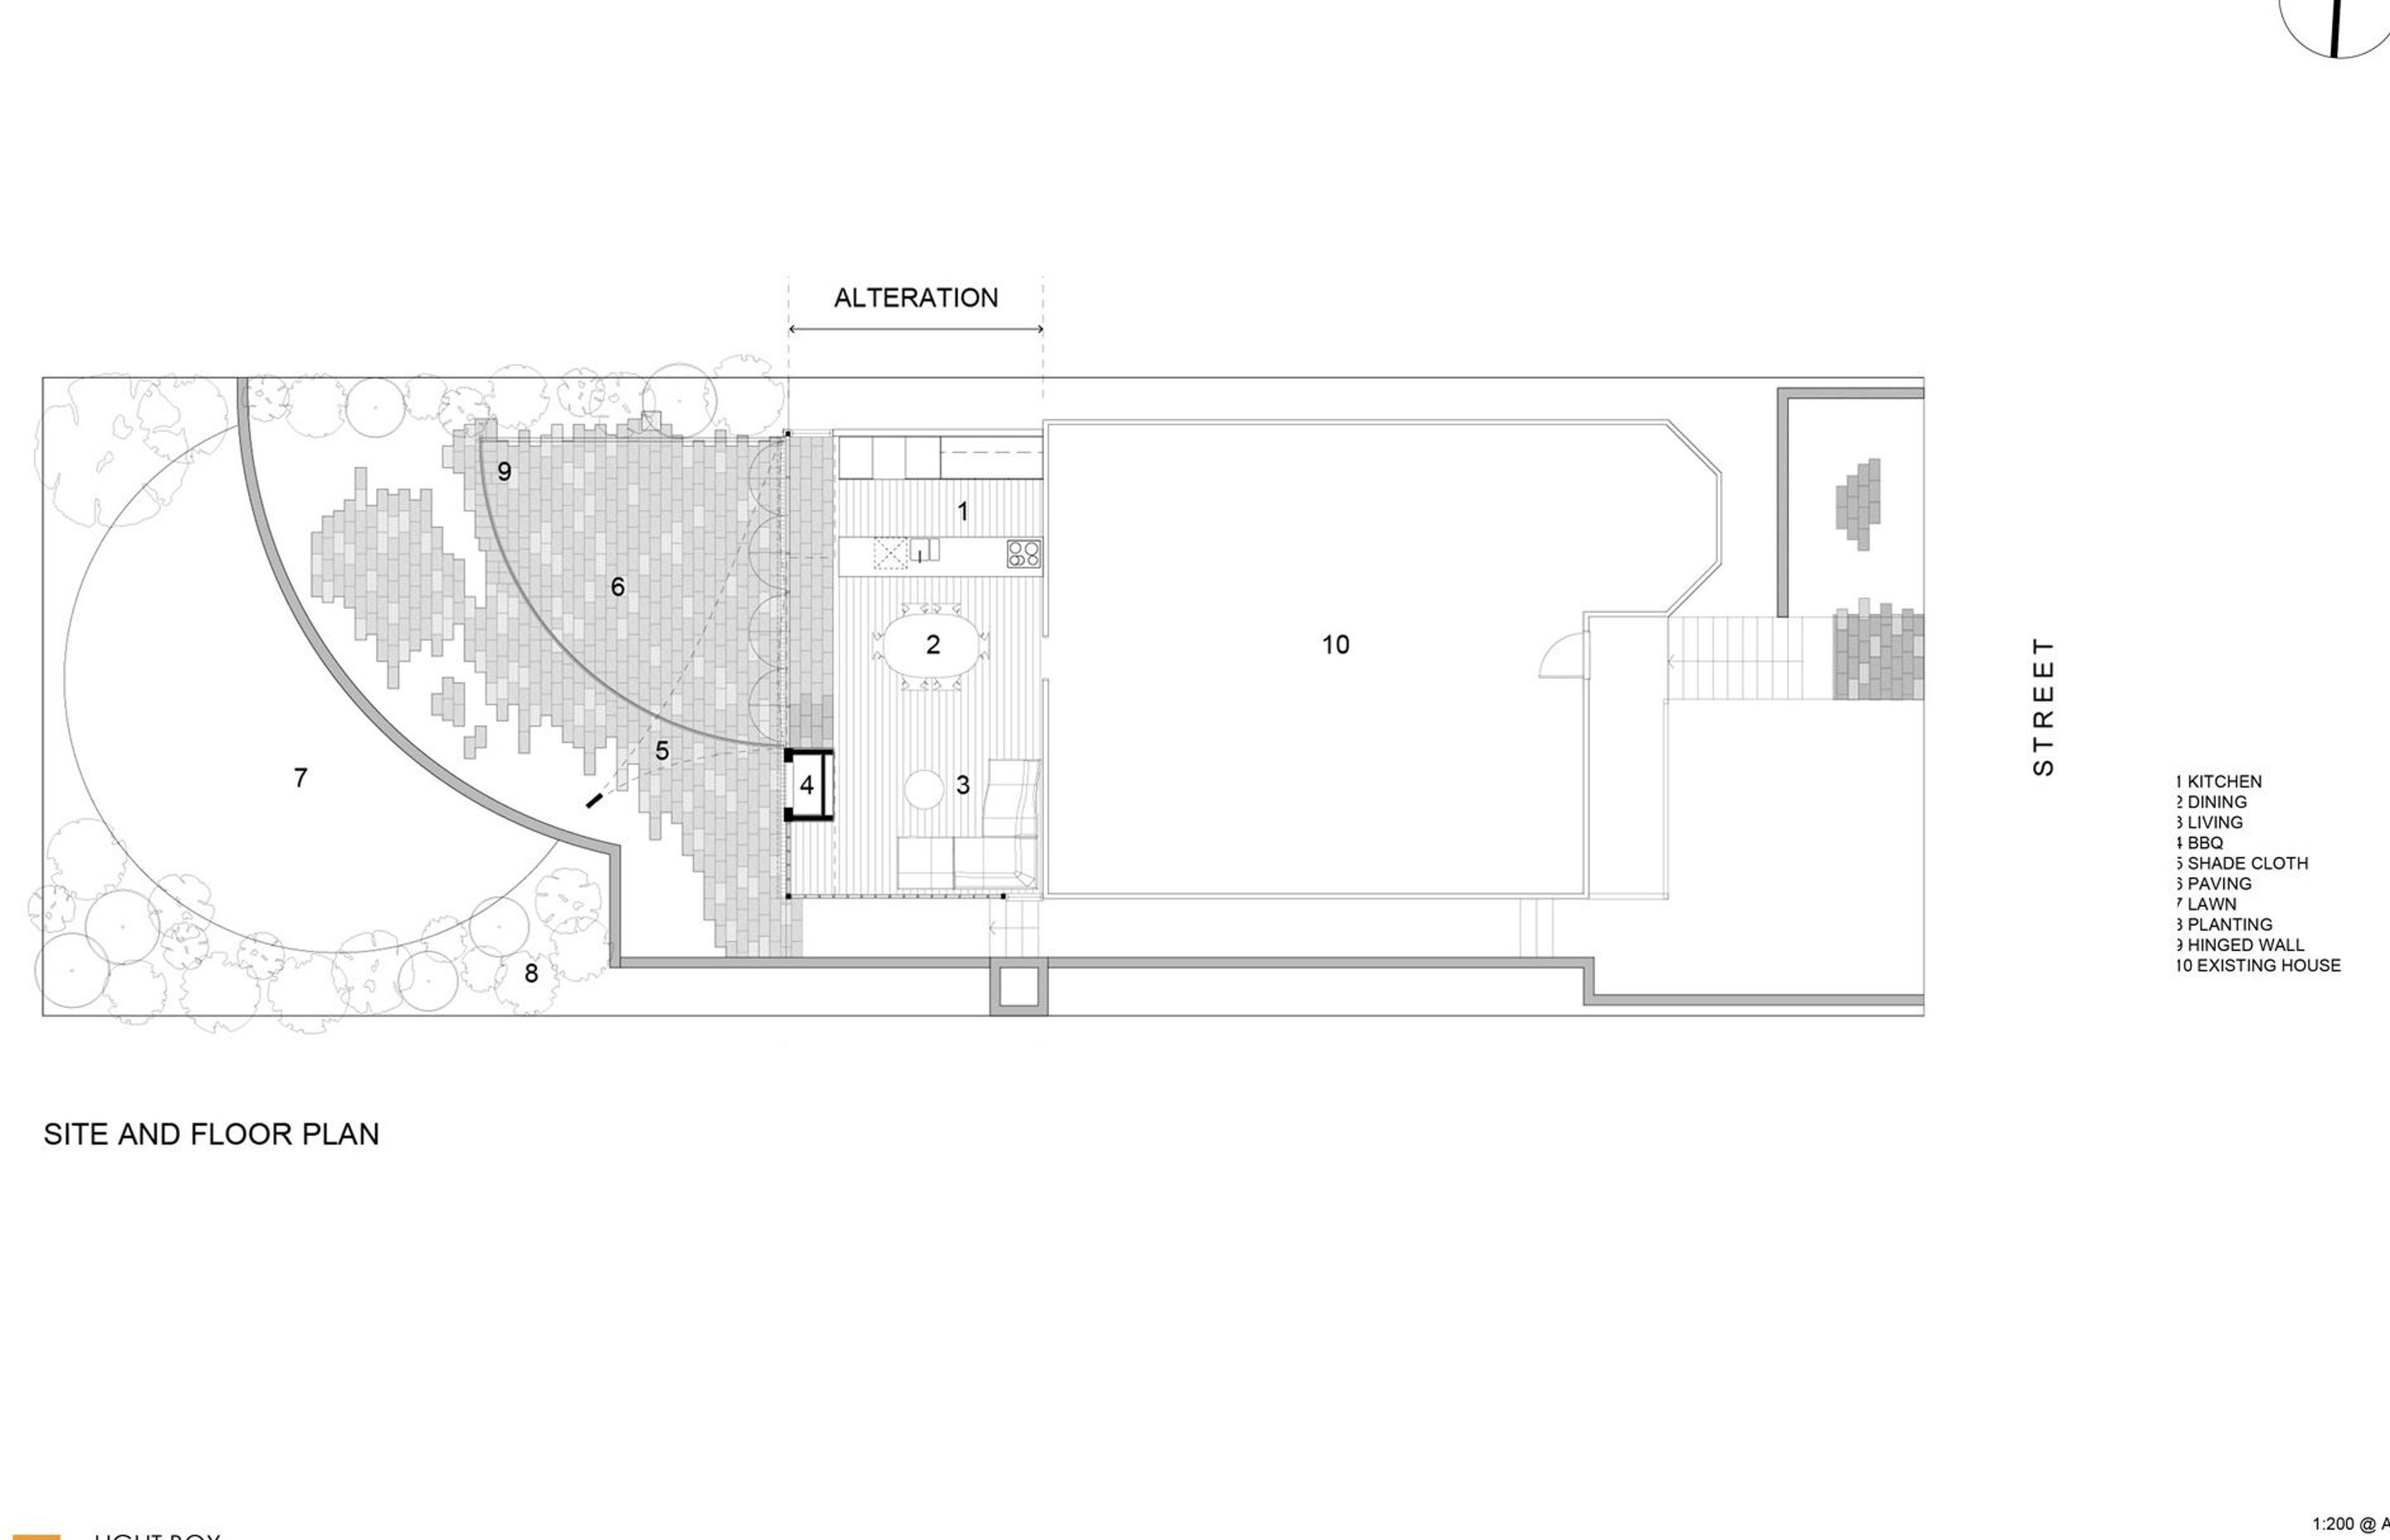 The site and floor plan of the original dwelling showing the recent Lightbox addition.